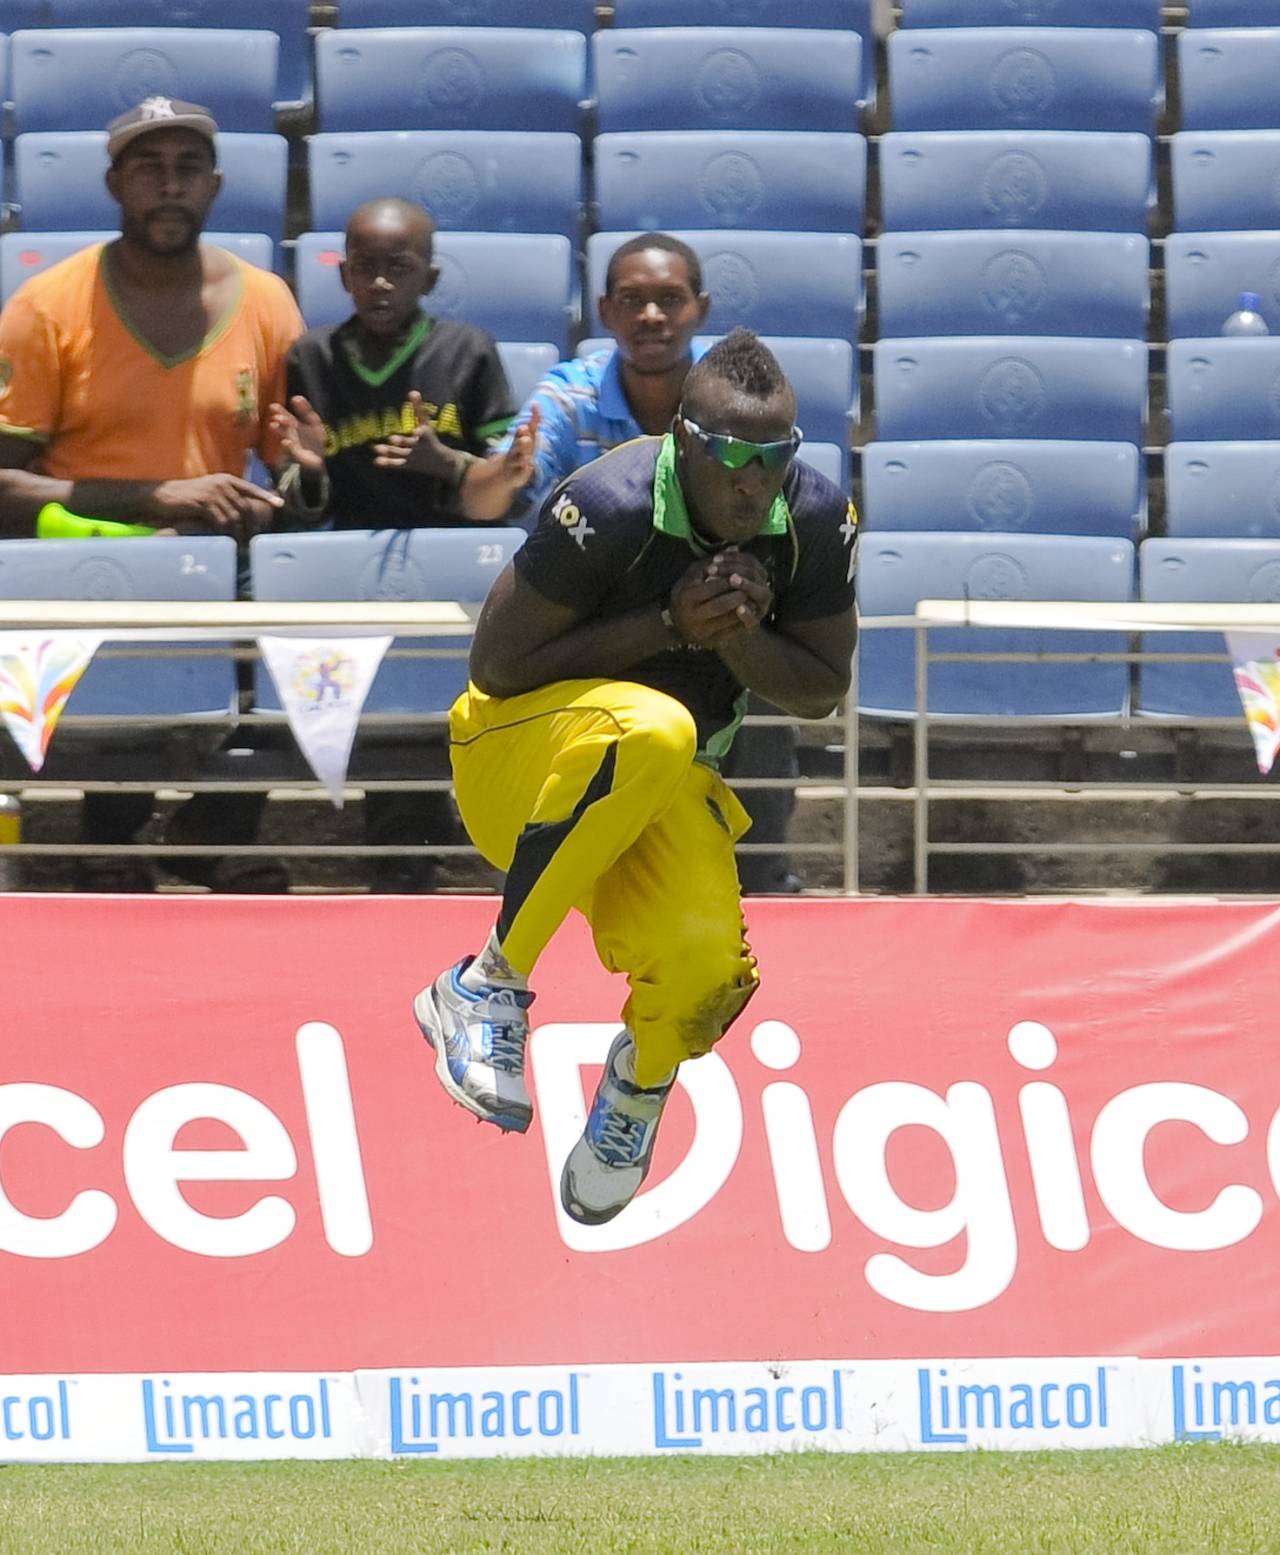 Andre Russell clings onto a catch to remove Jimmy Neesham, Jamaica Tallawahs v Guyana Amazon Warriors, CPL 2014, Kingston, August 2, 2014